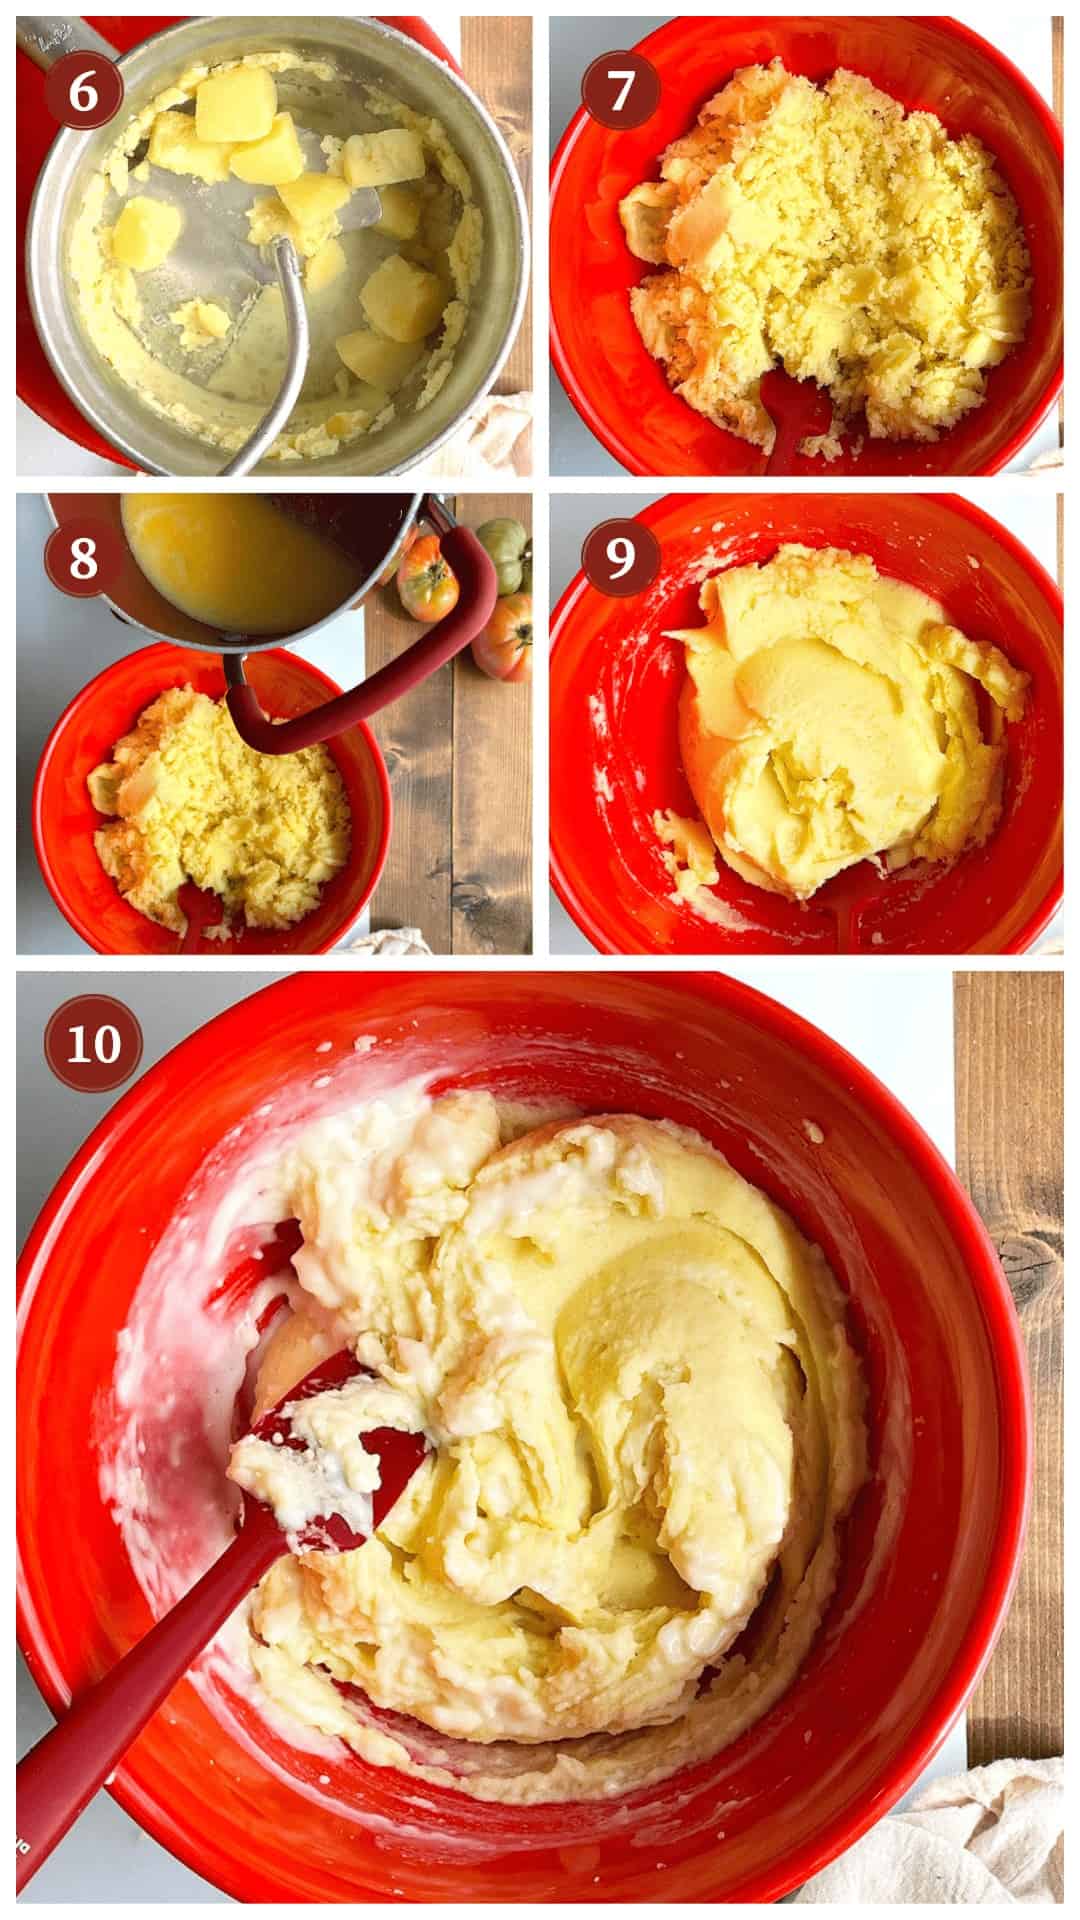 A collage of images showing how to make buttermilk mashed potatoes, steps 6 - 10.